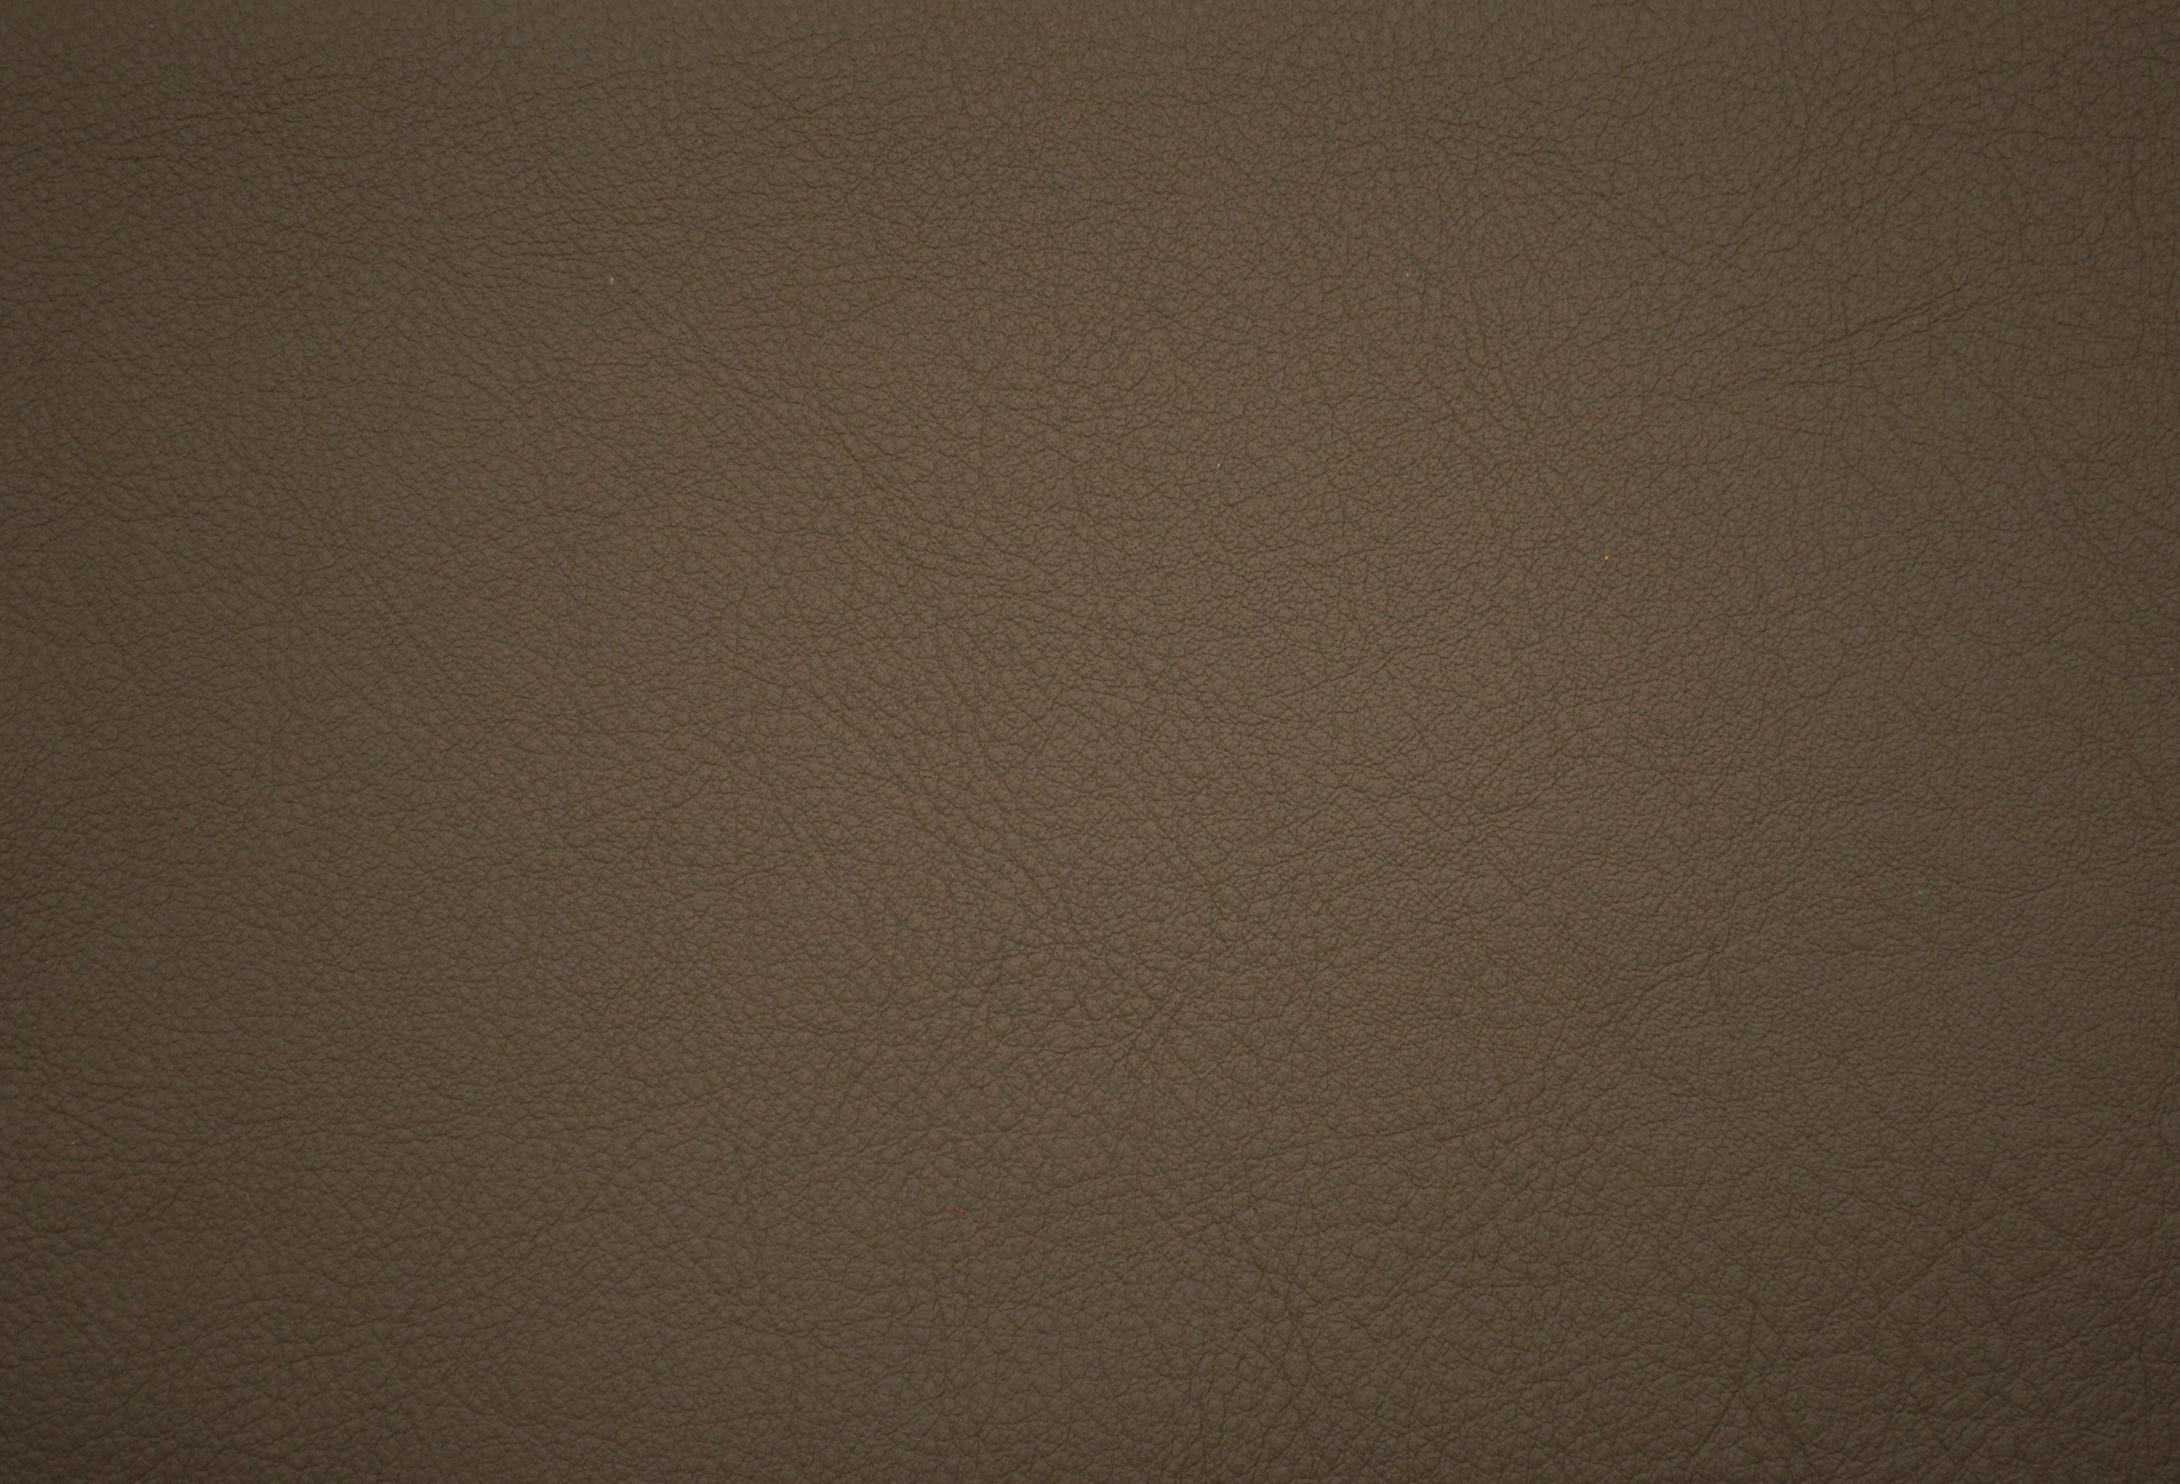 ELMOSOFT 13087 - Natural leather from Elmo | Architonic